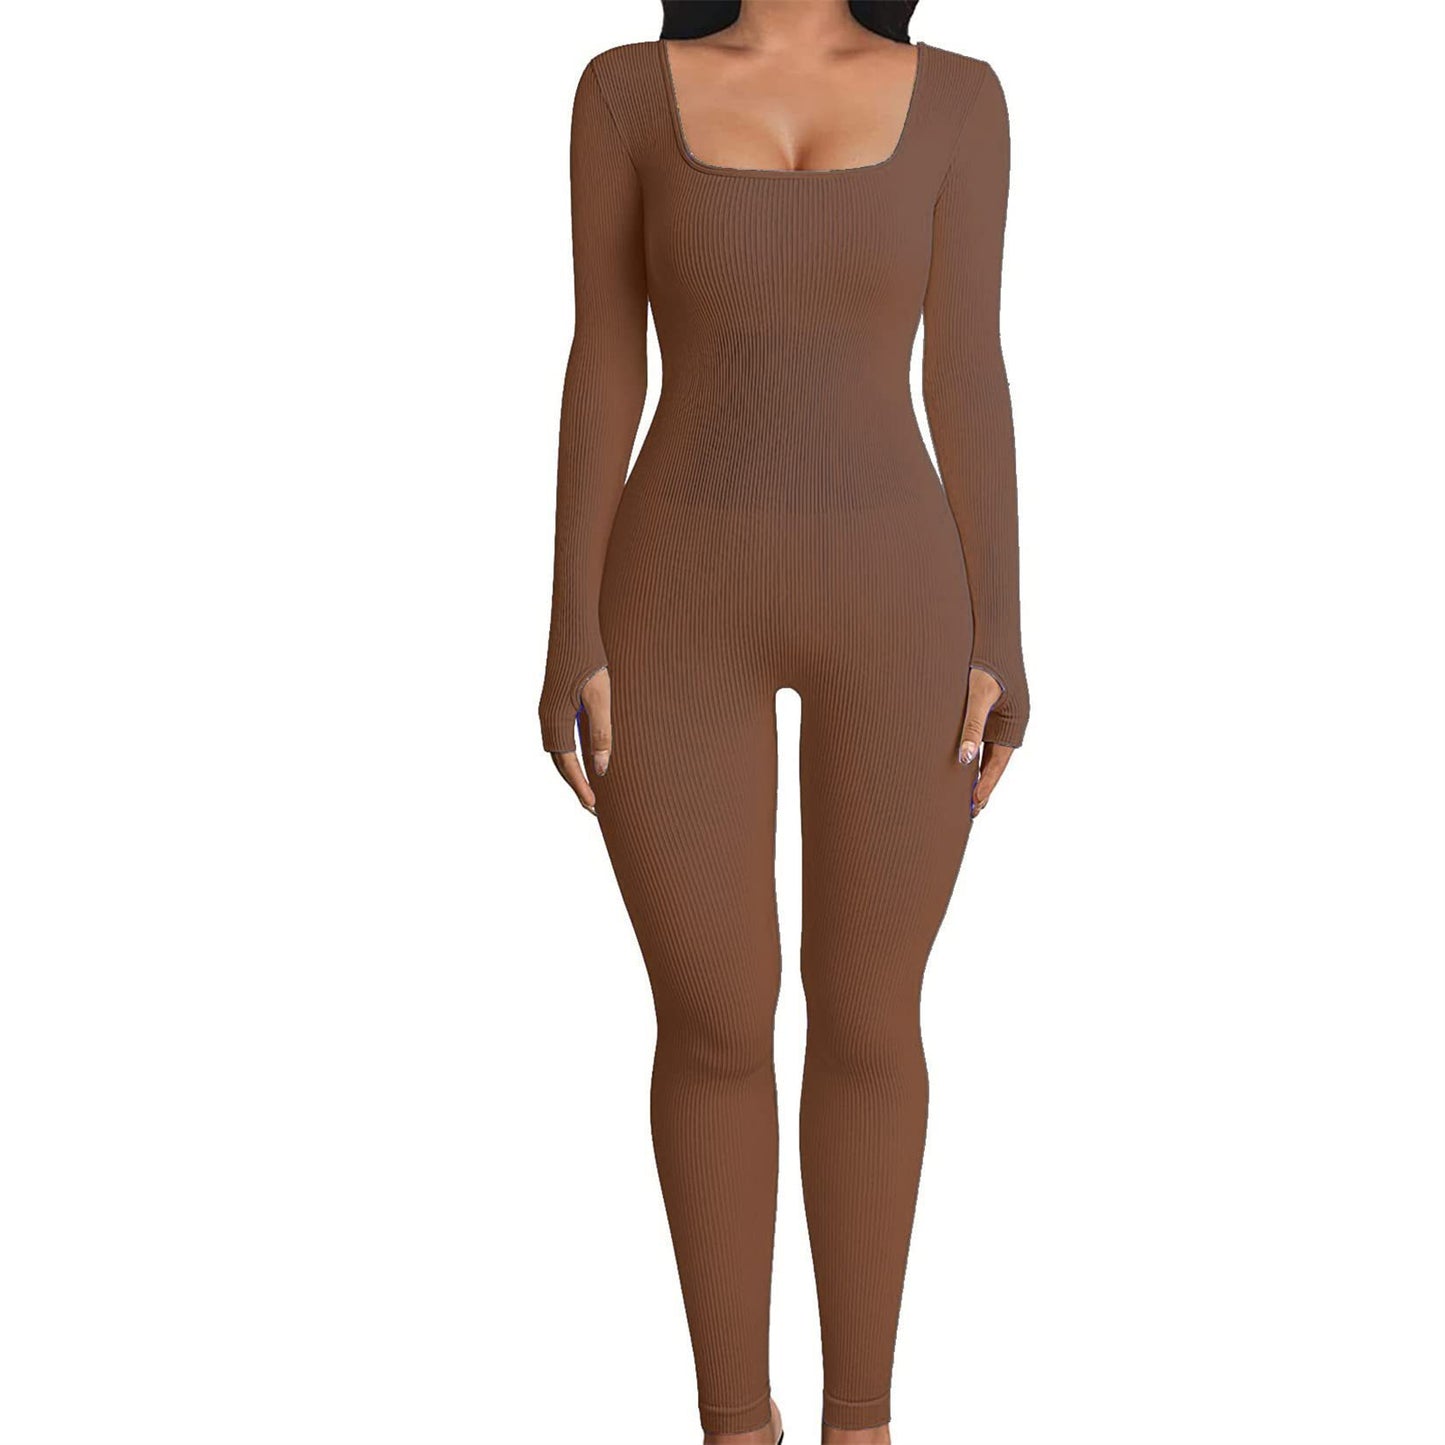 Urban Chic: One-Piece Thread Bodysuit in Dazzling Colors – Sizes S to 3XL